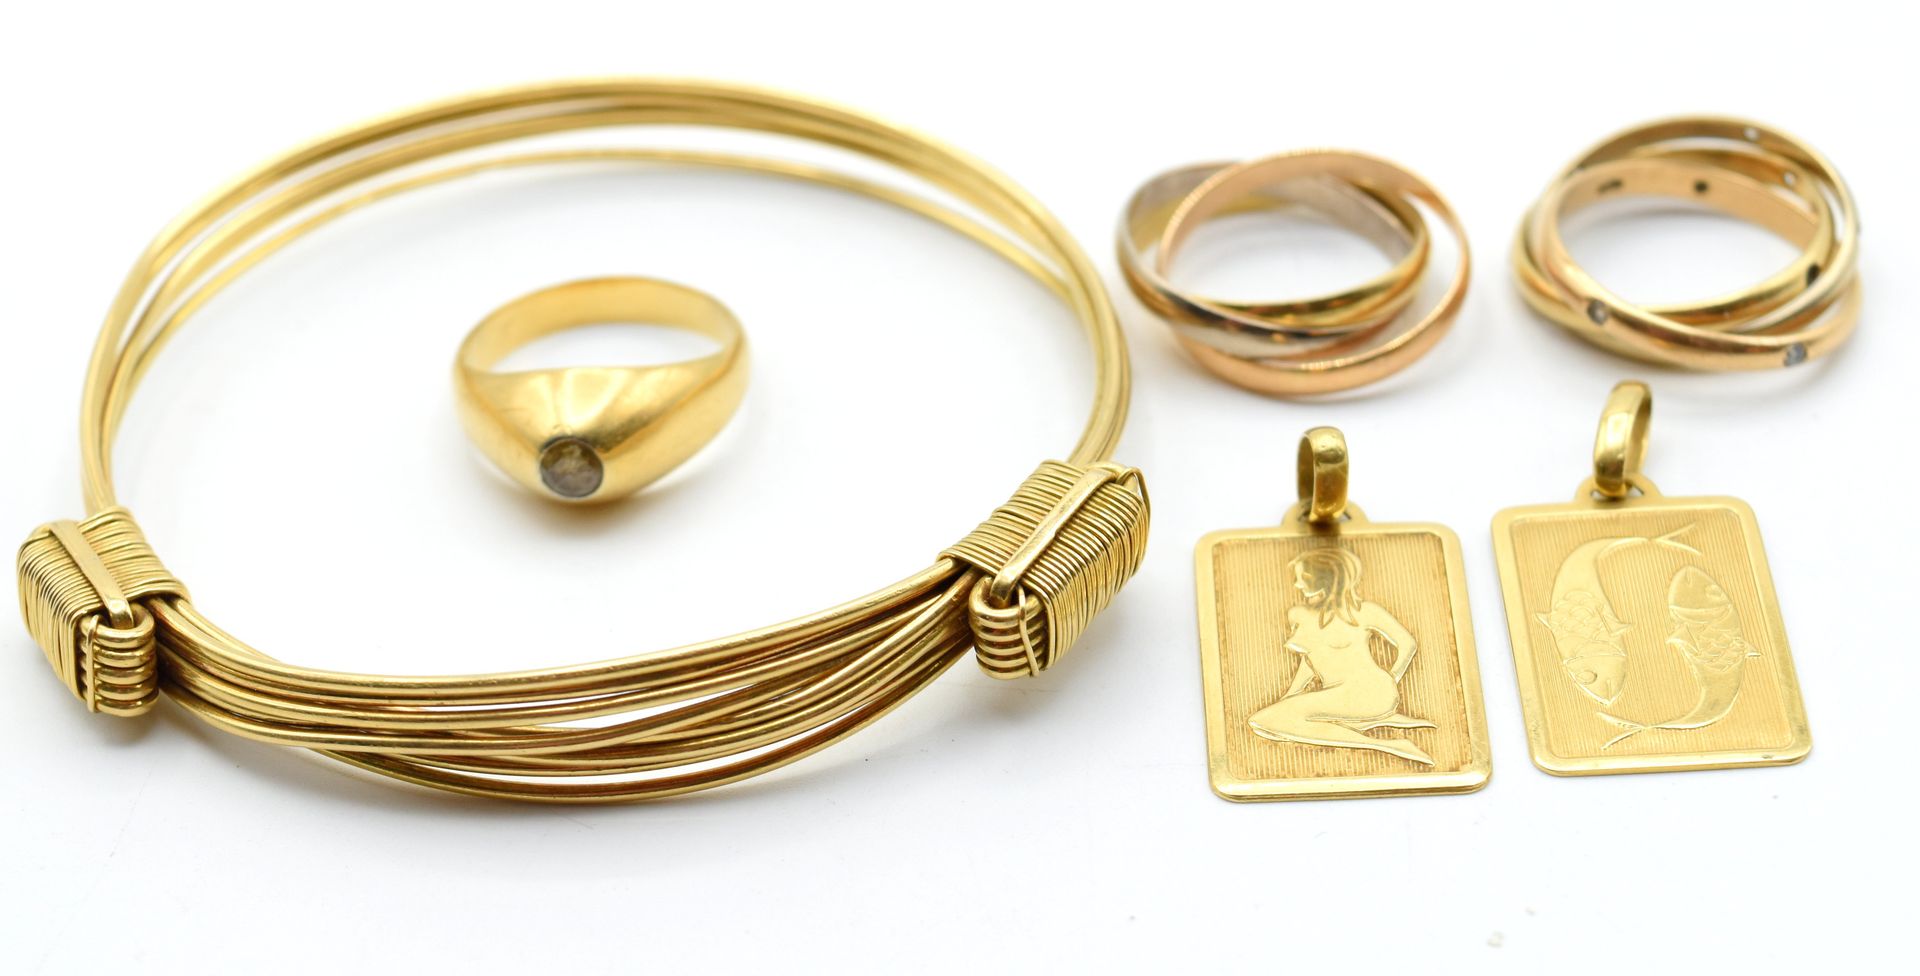 Null 18 ct gold signet ring, 2 rings, 2 pendants and hard bracelet in 3 colors (&hellip;